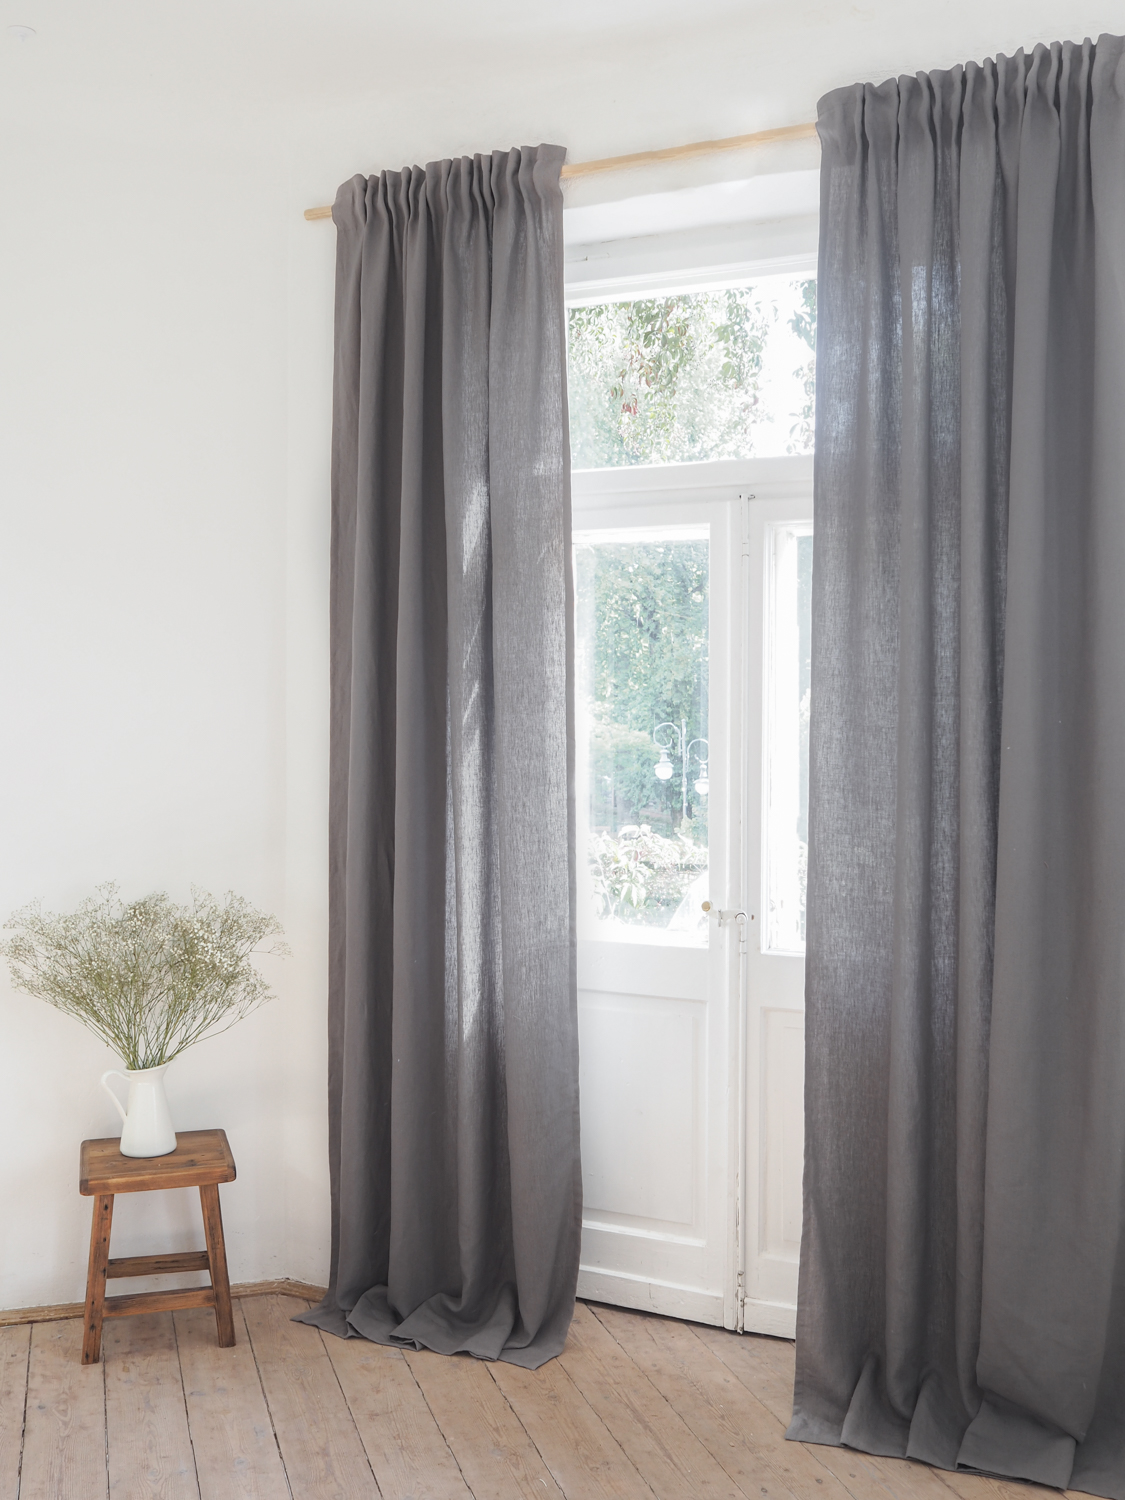 Gray solid linen curtains with tape